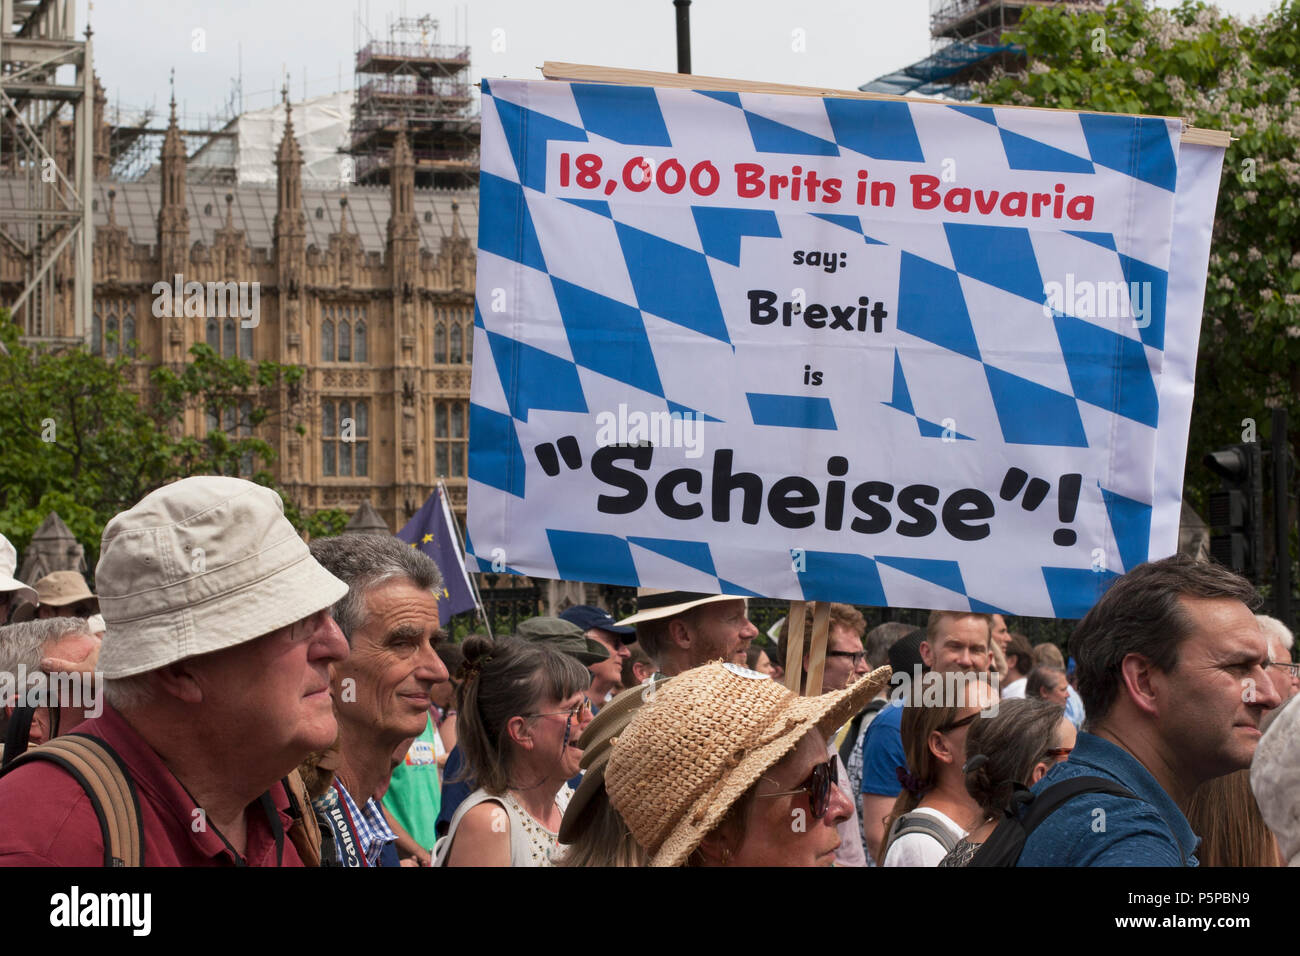 People's Vote March, London, UK, 23rd June 2018. Banner: 18,000 Brits in Bavaria say Brexit is “Scheisse”! Stock Photo